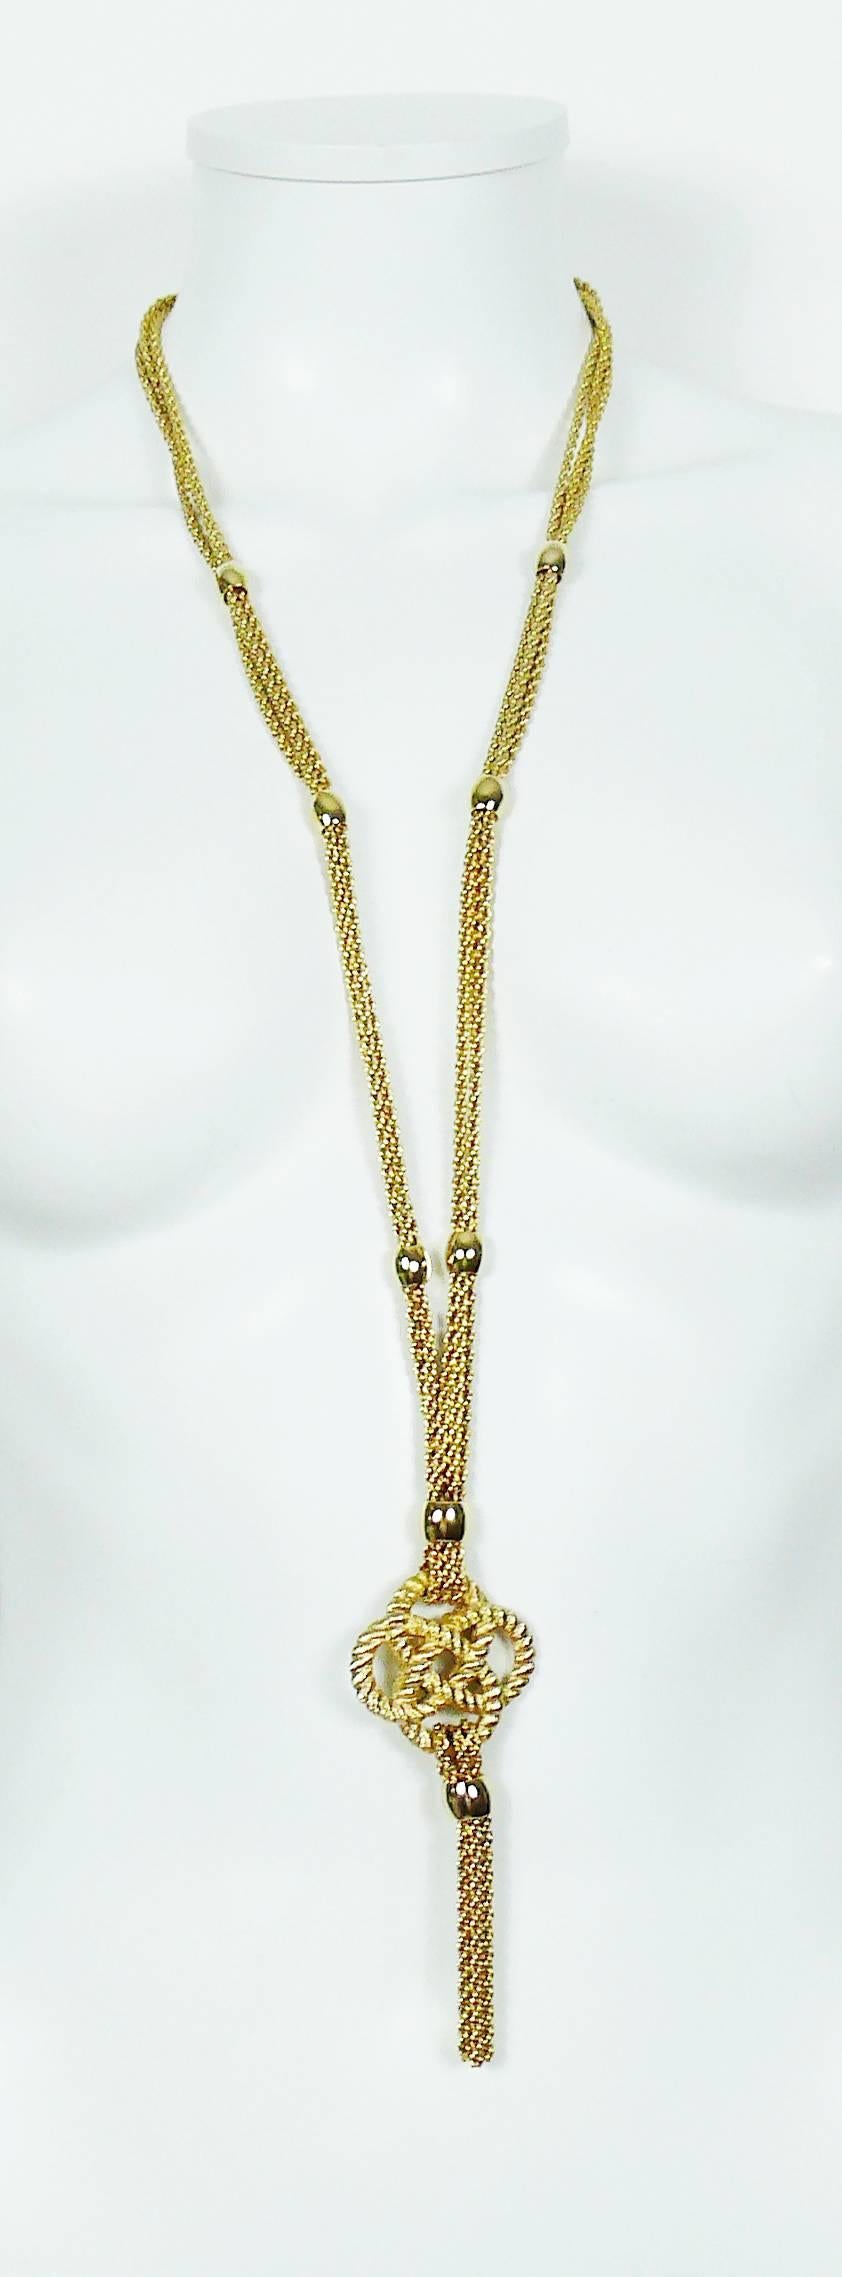 CHRISTIAN DIOR vintage multi chain gold toned sautoir necklace featuring a rope design and tassel pendant.

Marked CHR. DIOR ©.

CD secure clasp closure.

Indicative measurements : chain length approx. 87 cm (34.25 inches).

JEWELRY CONDITION